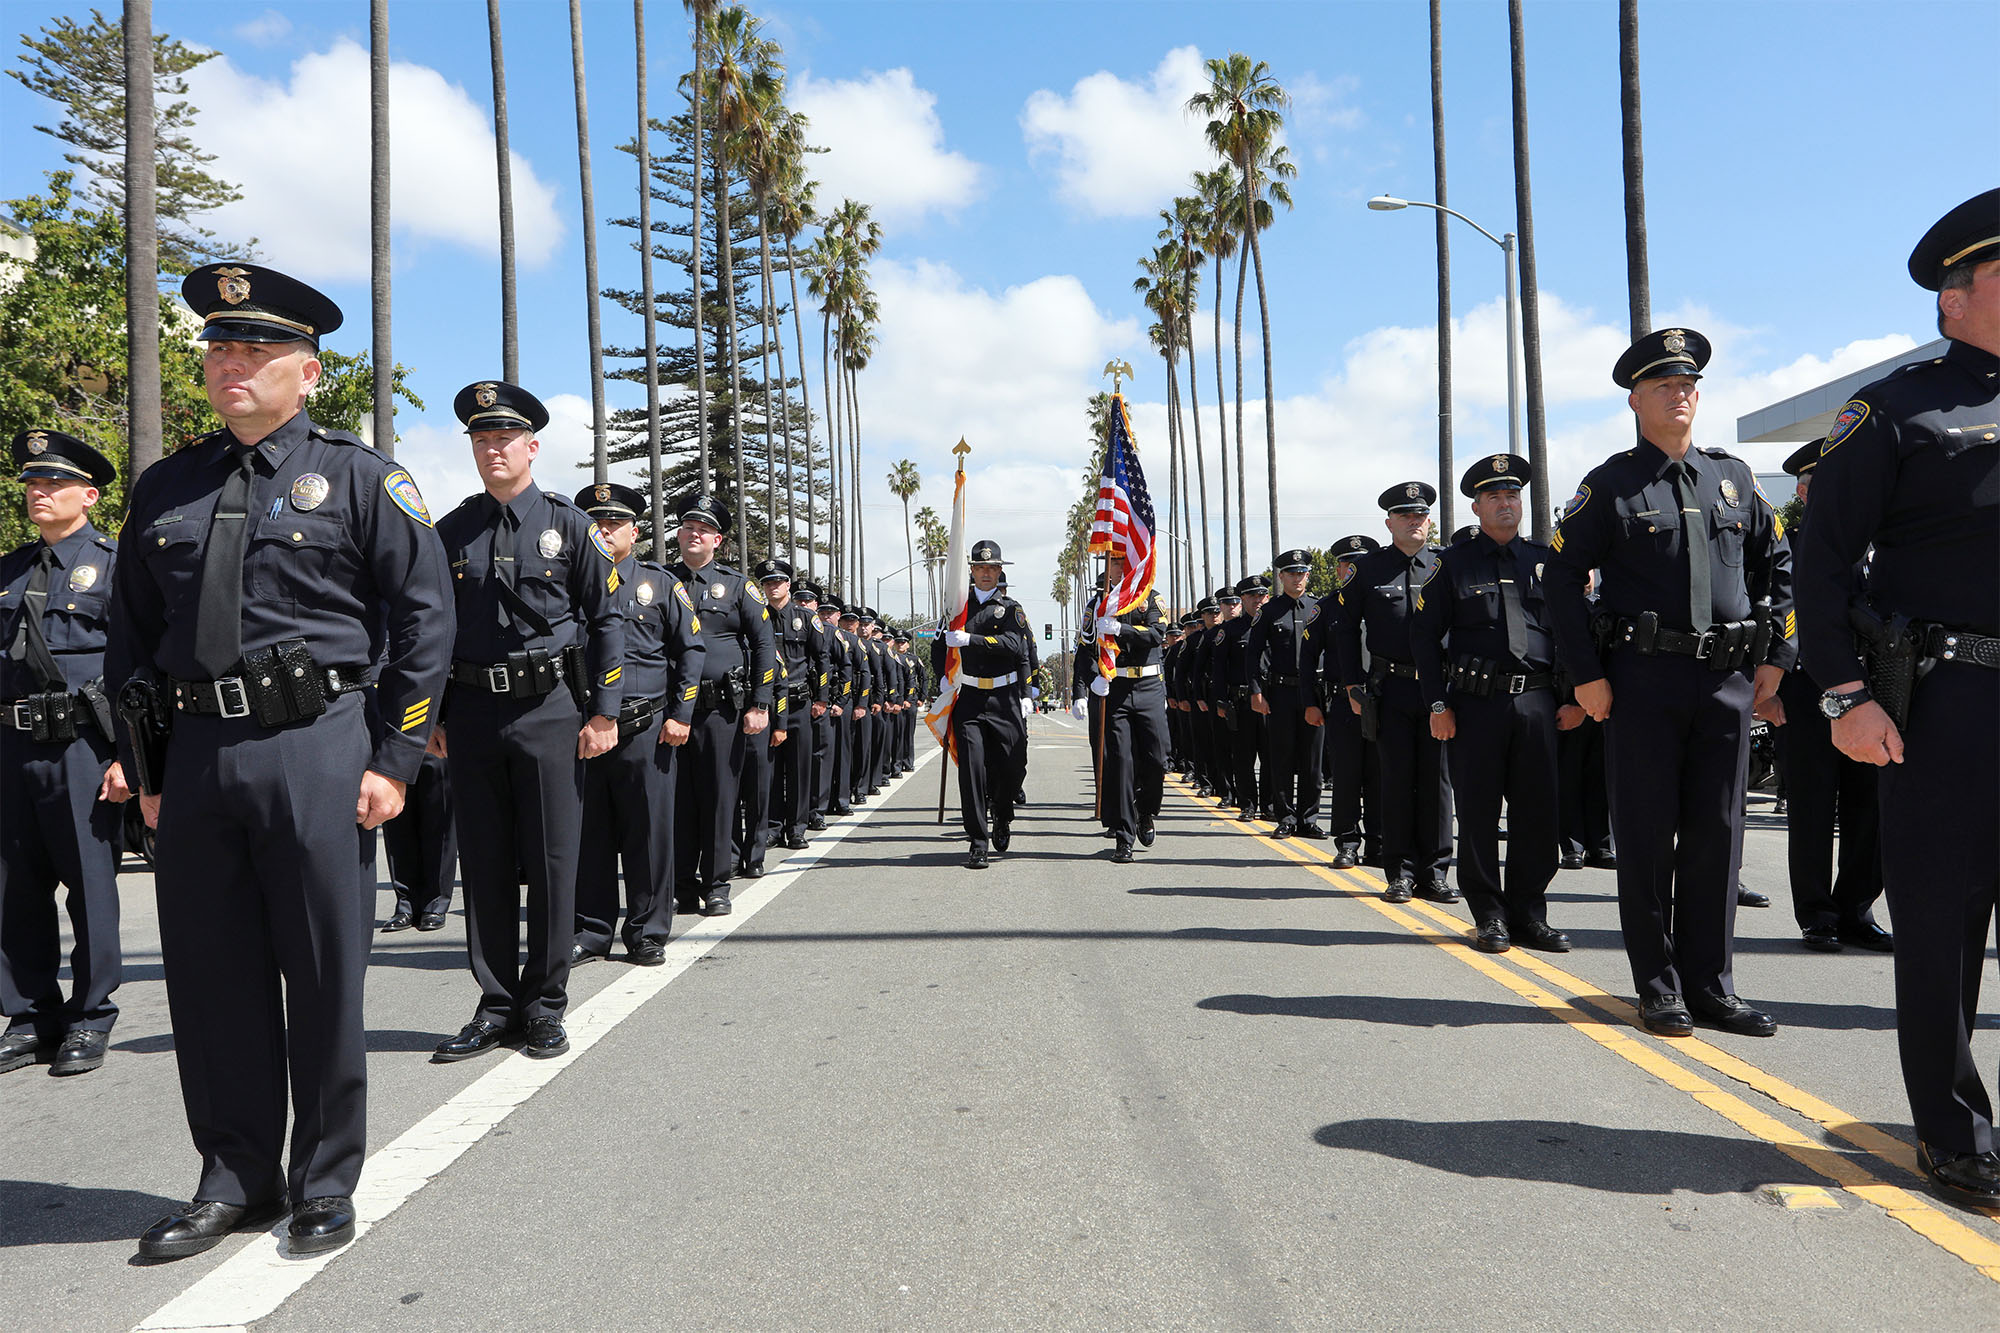 Police officers standing at formation during the Oxnard PD Memorial event.